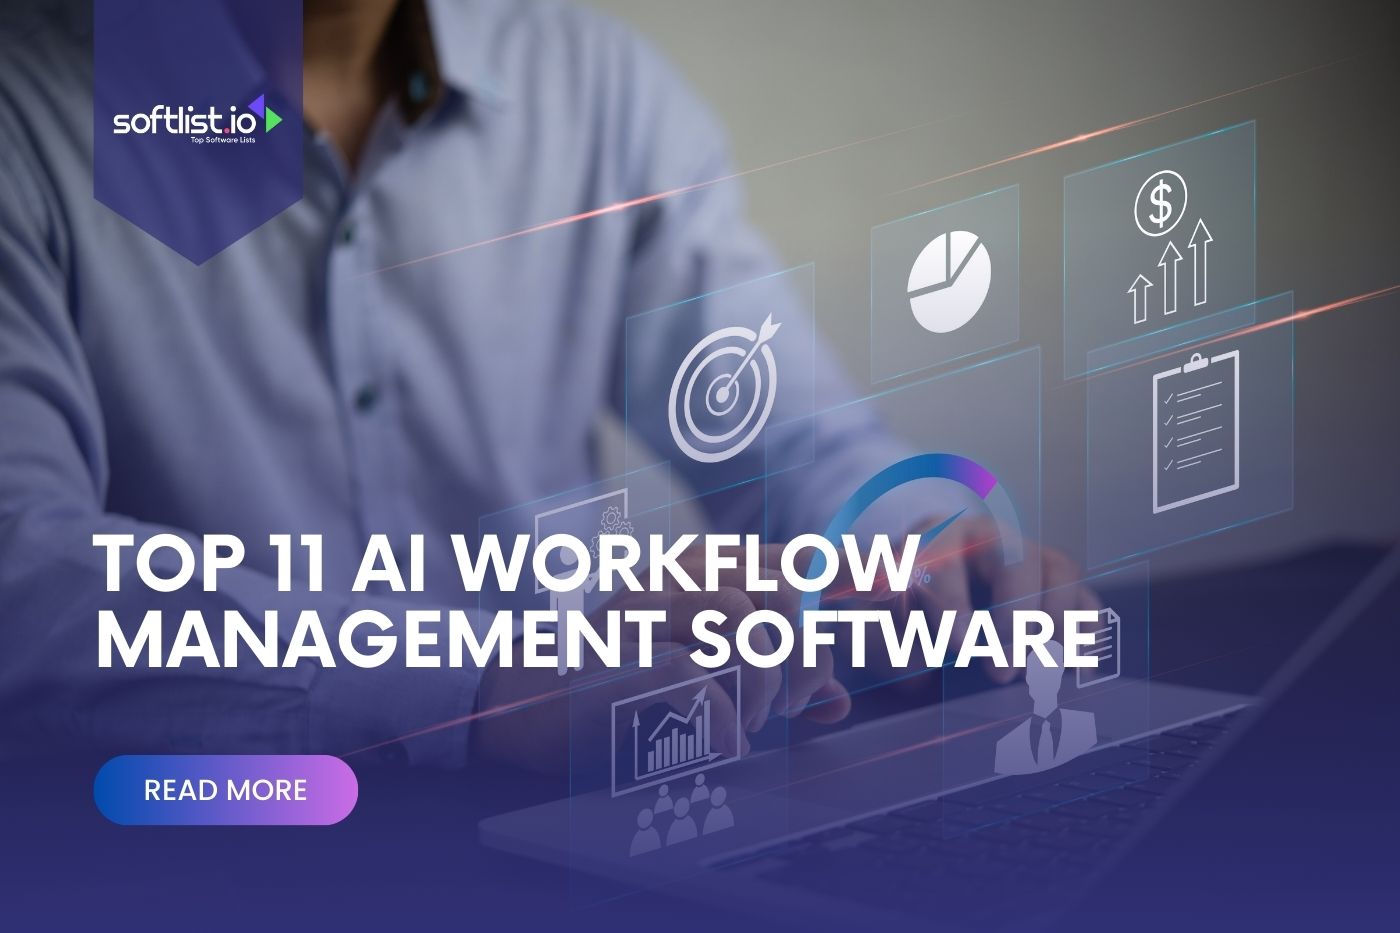 Top 11 AI Workflow Management Software